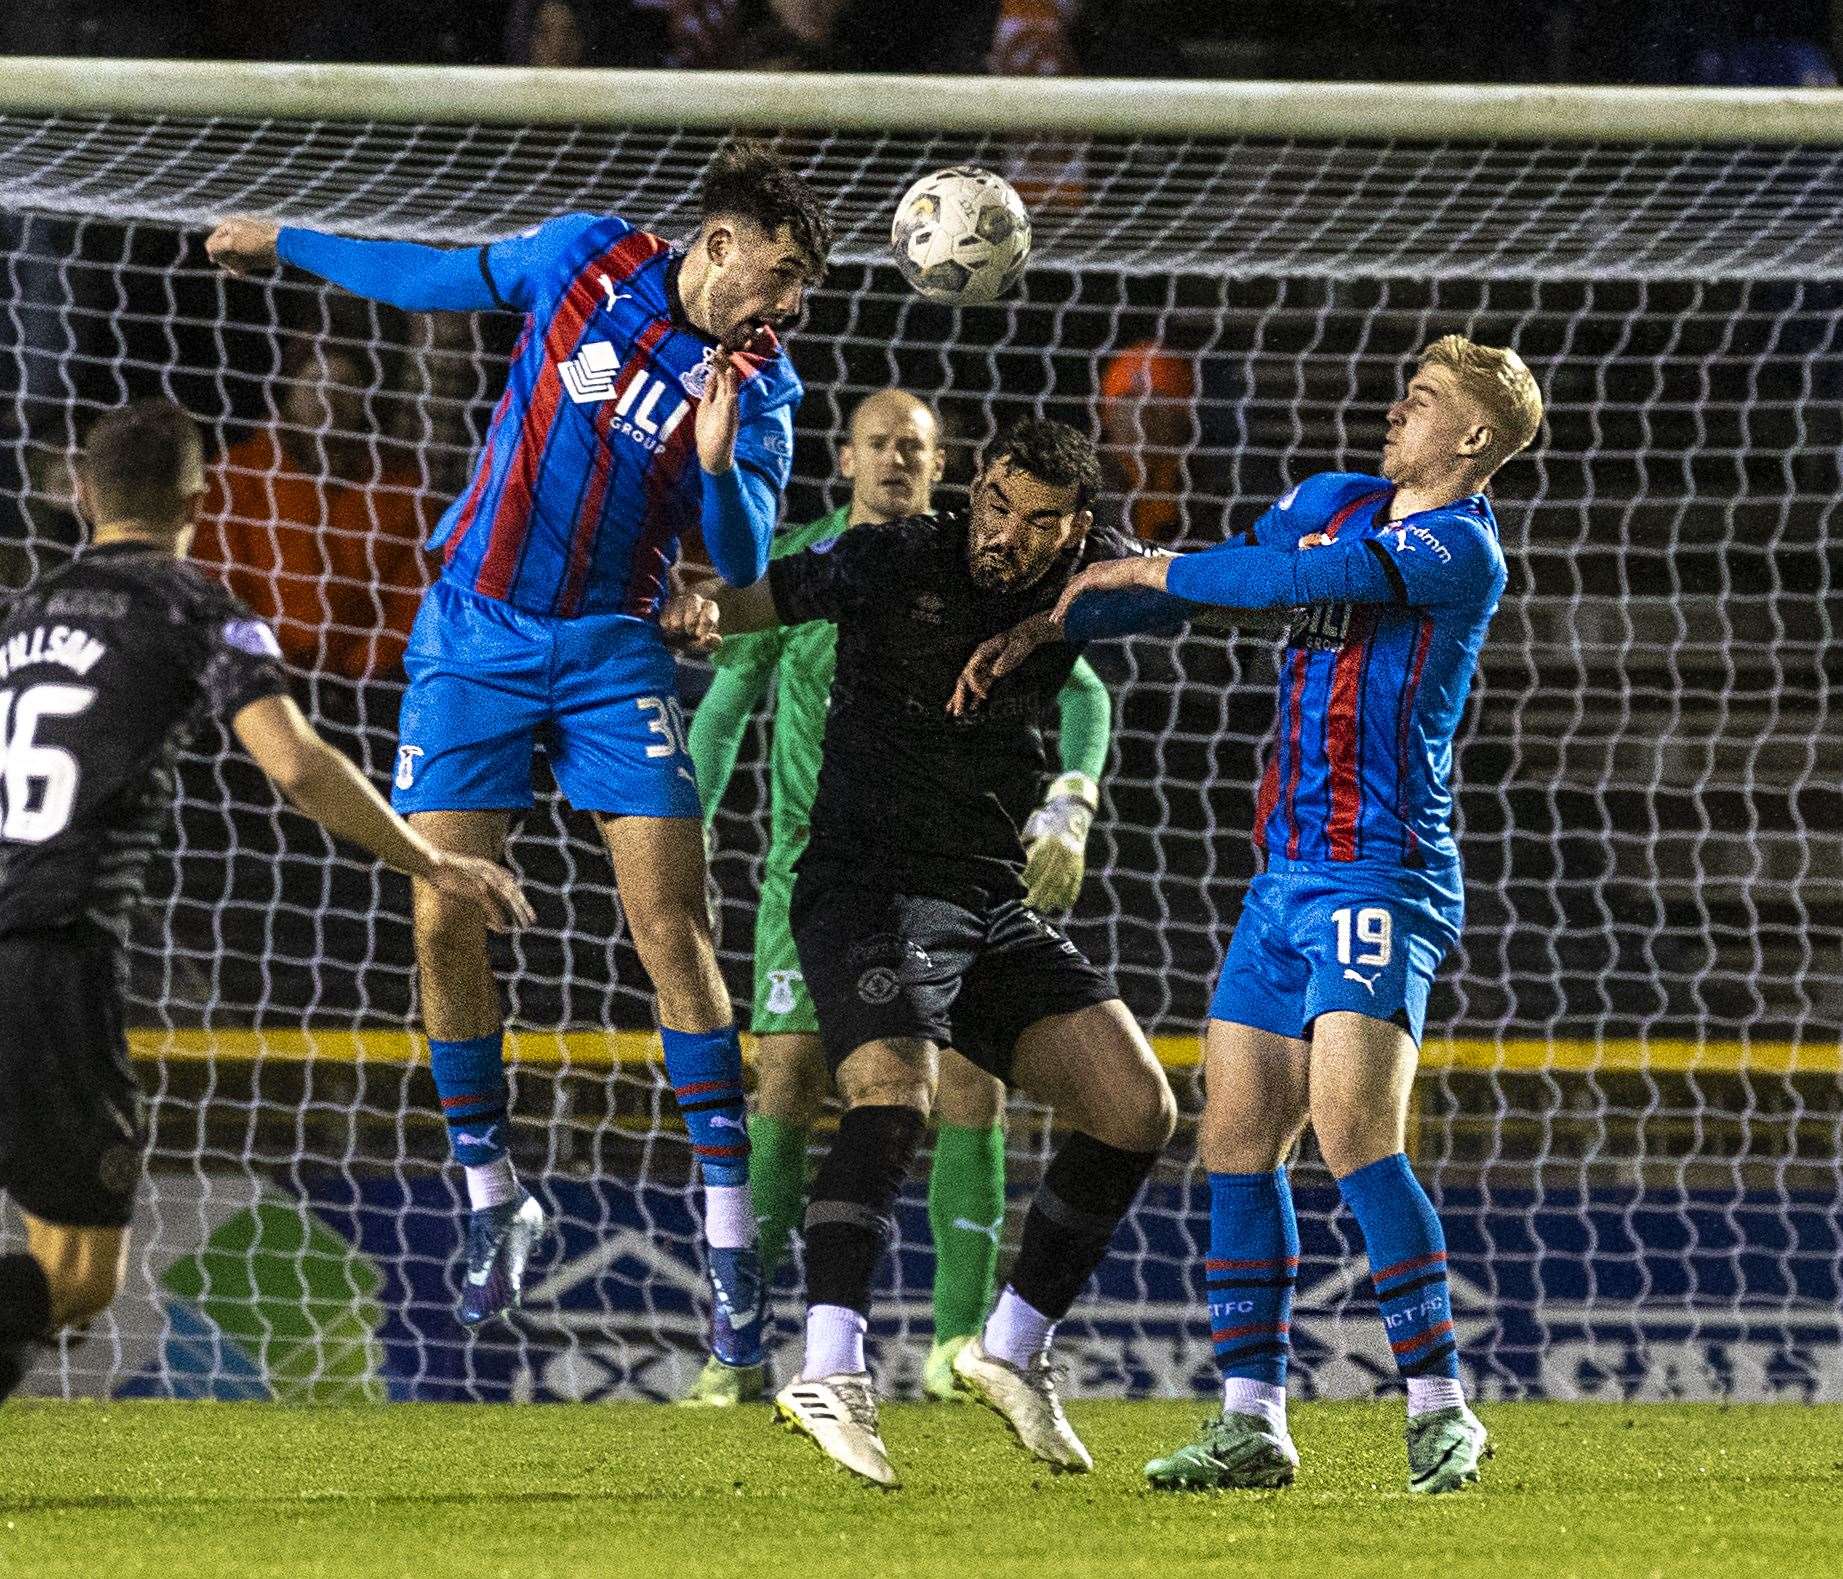 Inverness Caledonian Thistle lost to Dundee United last week. Picture: Ken Macpherson